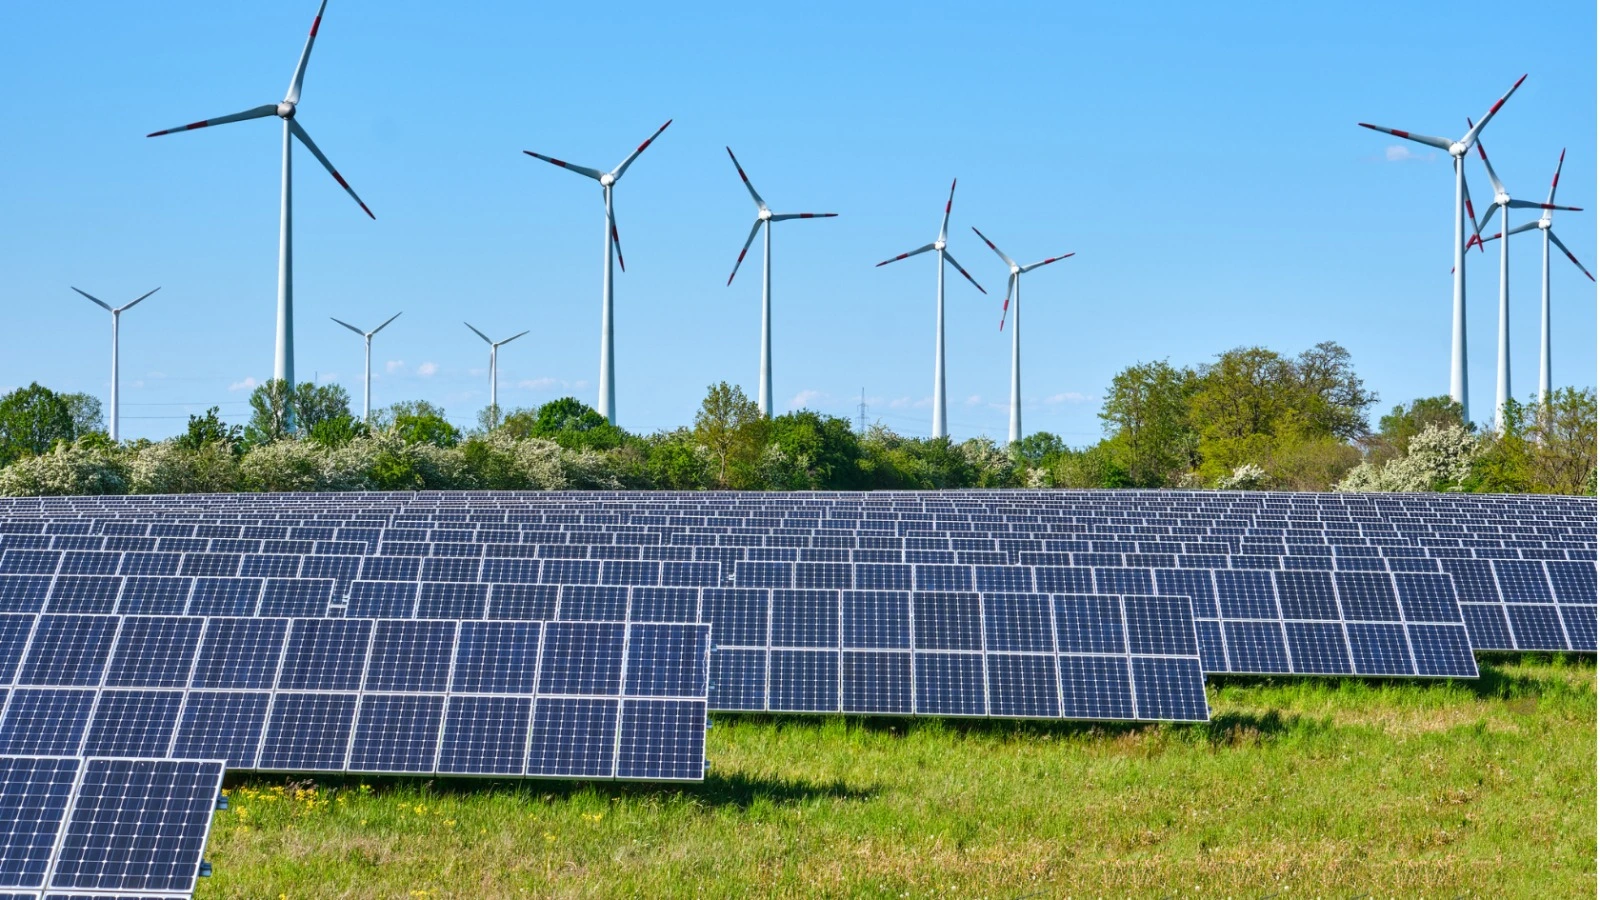 ReNew and Societe Generale sign MoU for $1 Billion in Financing for Renewable Energy Projects